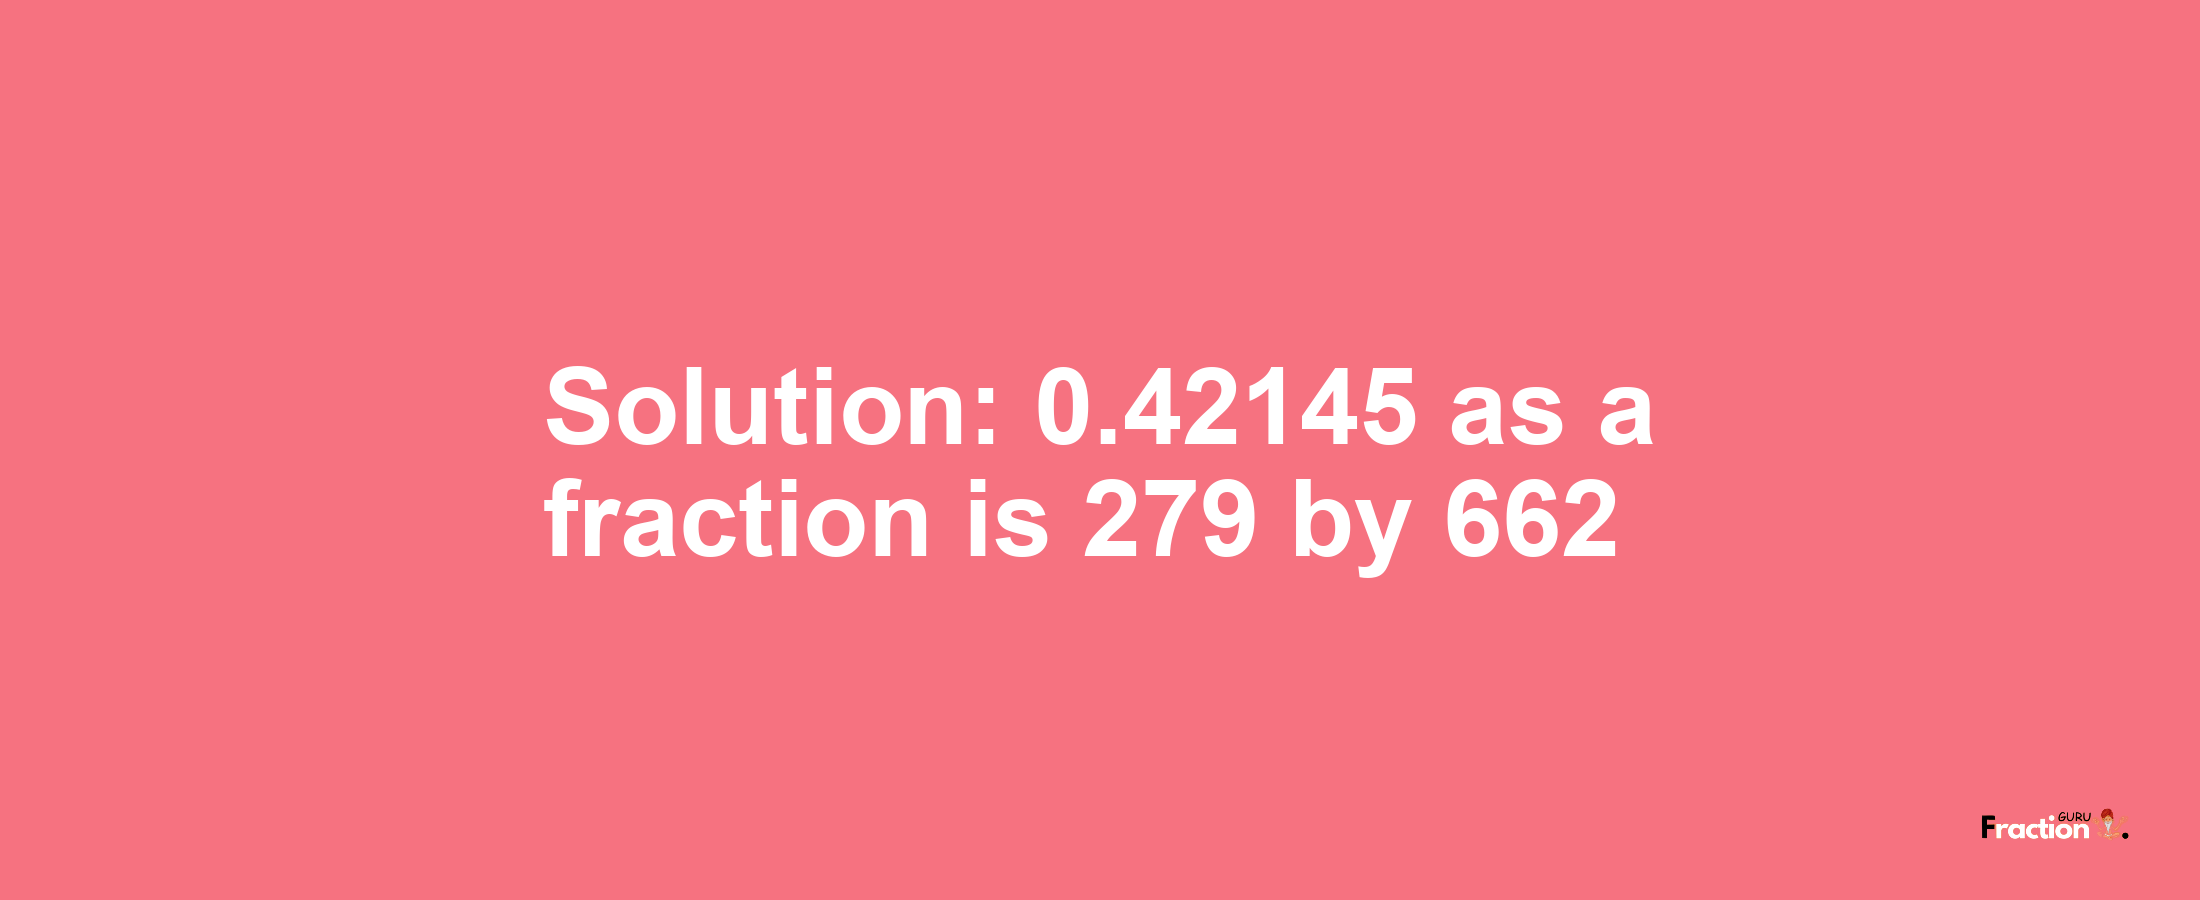 Solution:0.42145 as a fraction is 279/662